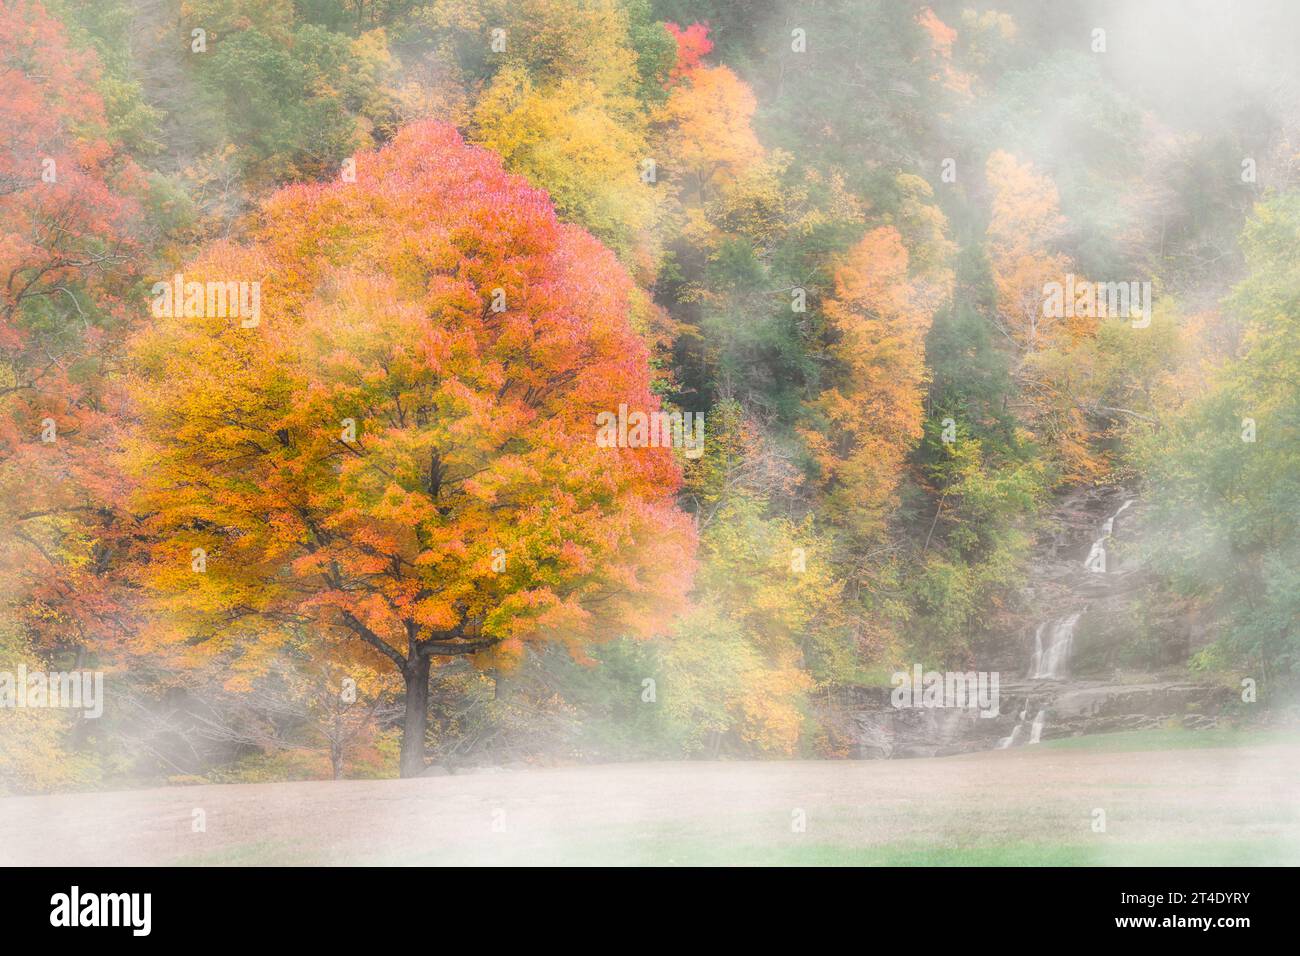 Kent Falls State Park CT  - View to Kent Falls in Kent, Connecticut surrounded by the beautiful colors of fall foliage and fog. Stock Photo